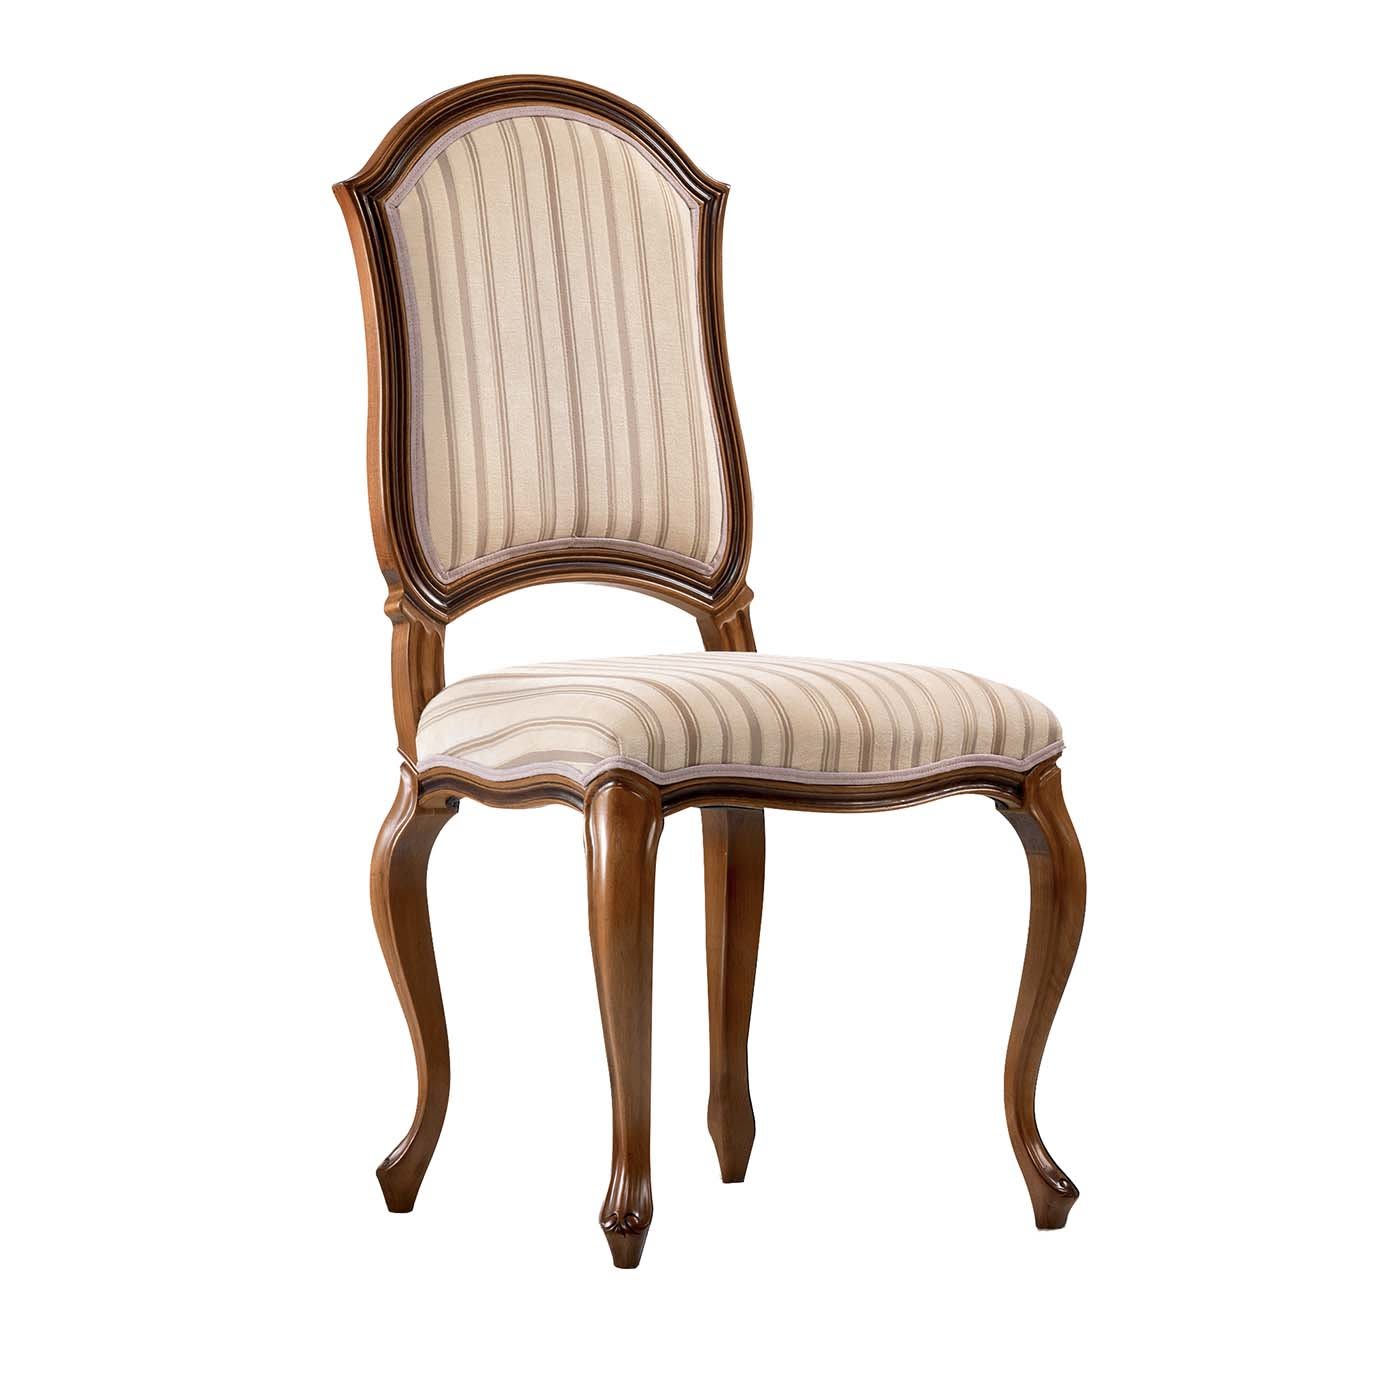 Contemporary wooden dining chair with striped fabric - Modenese Gastone